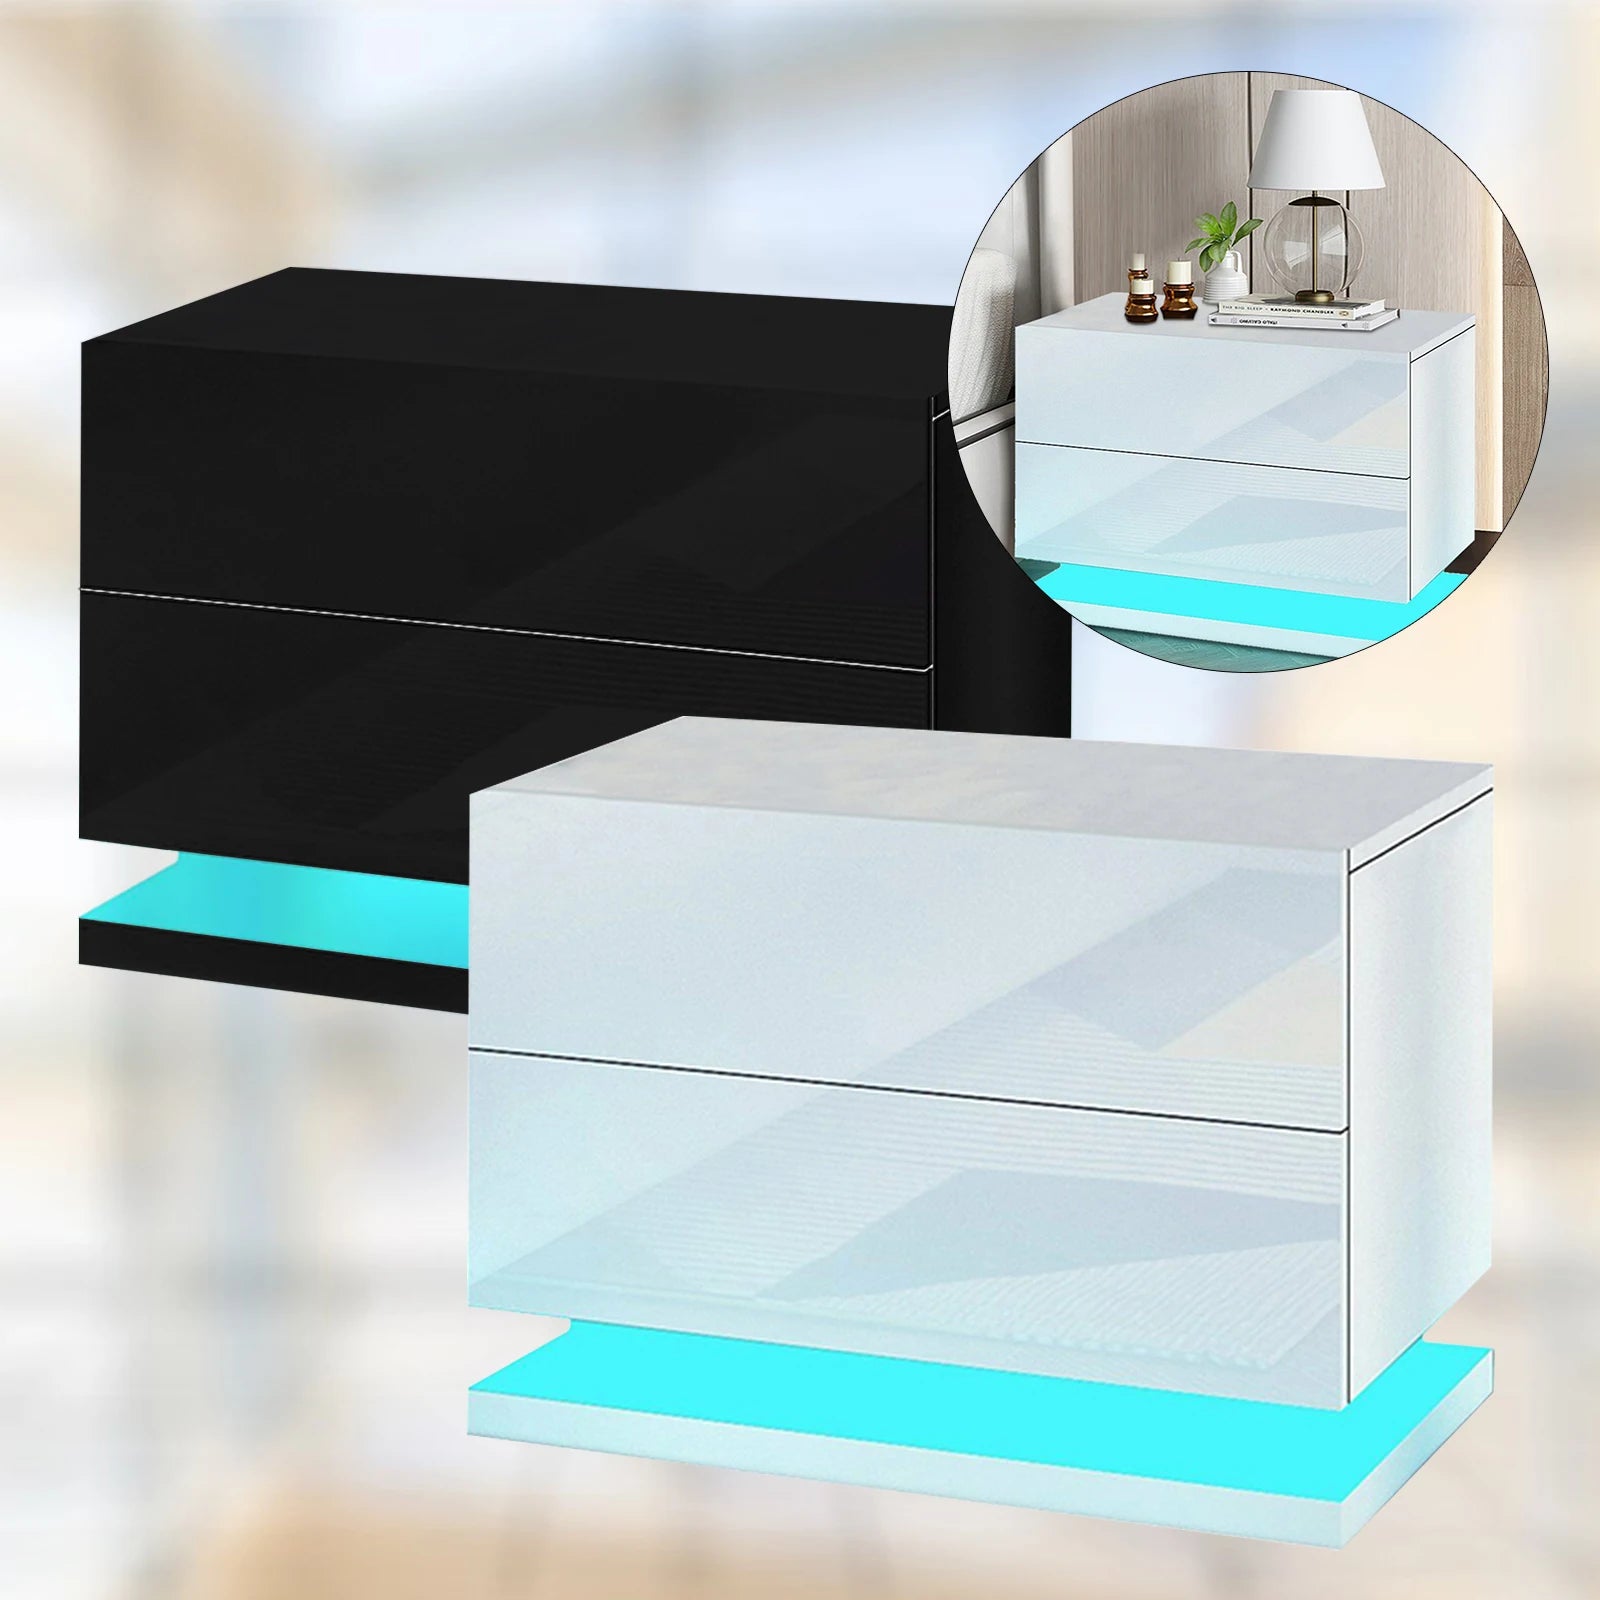 50×35×43cm Bedside Table Nightstand Cabinet High Gloss 2 Drawers w/ Led Light Bedroom 